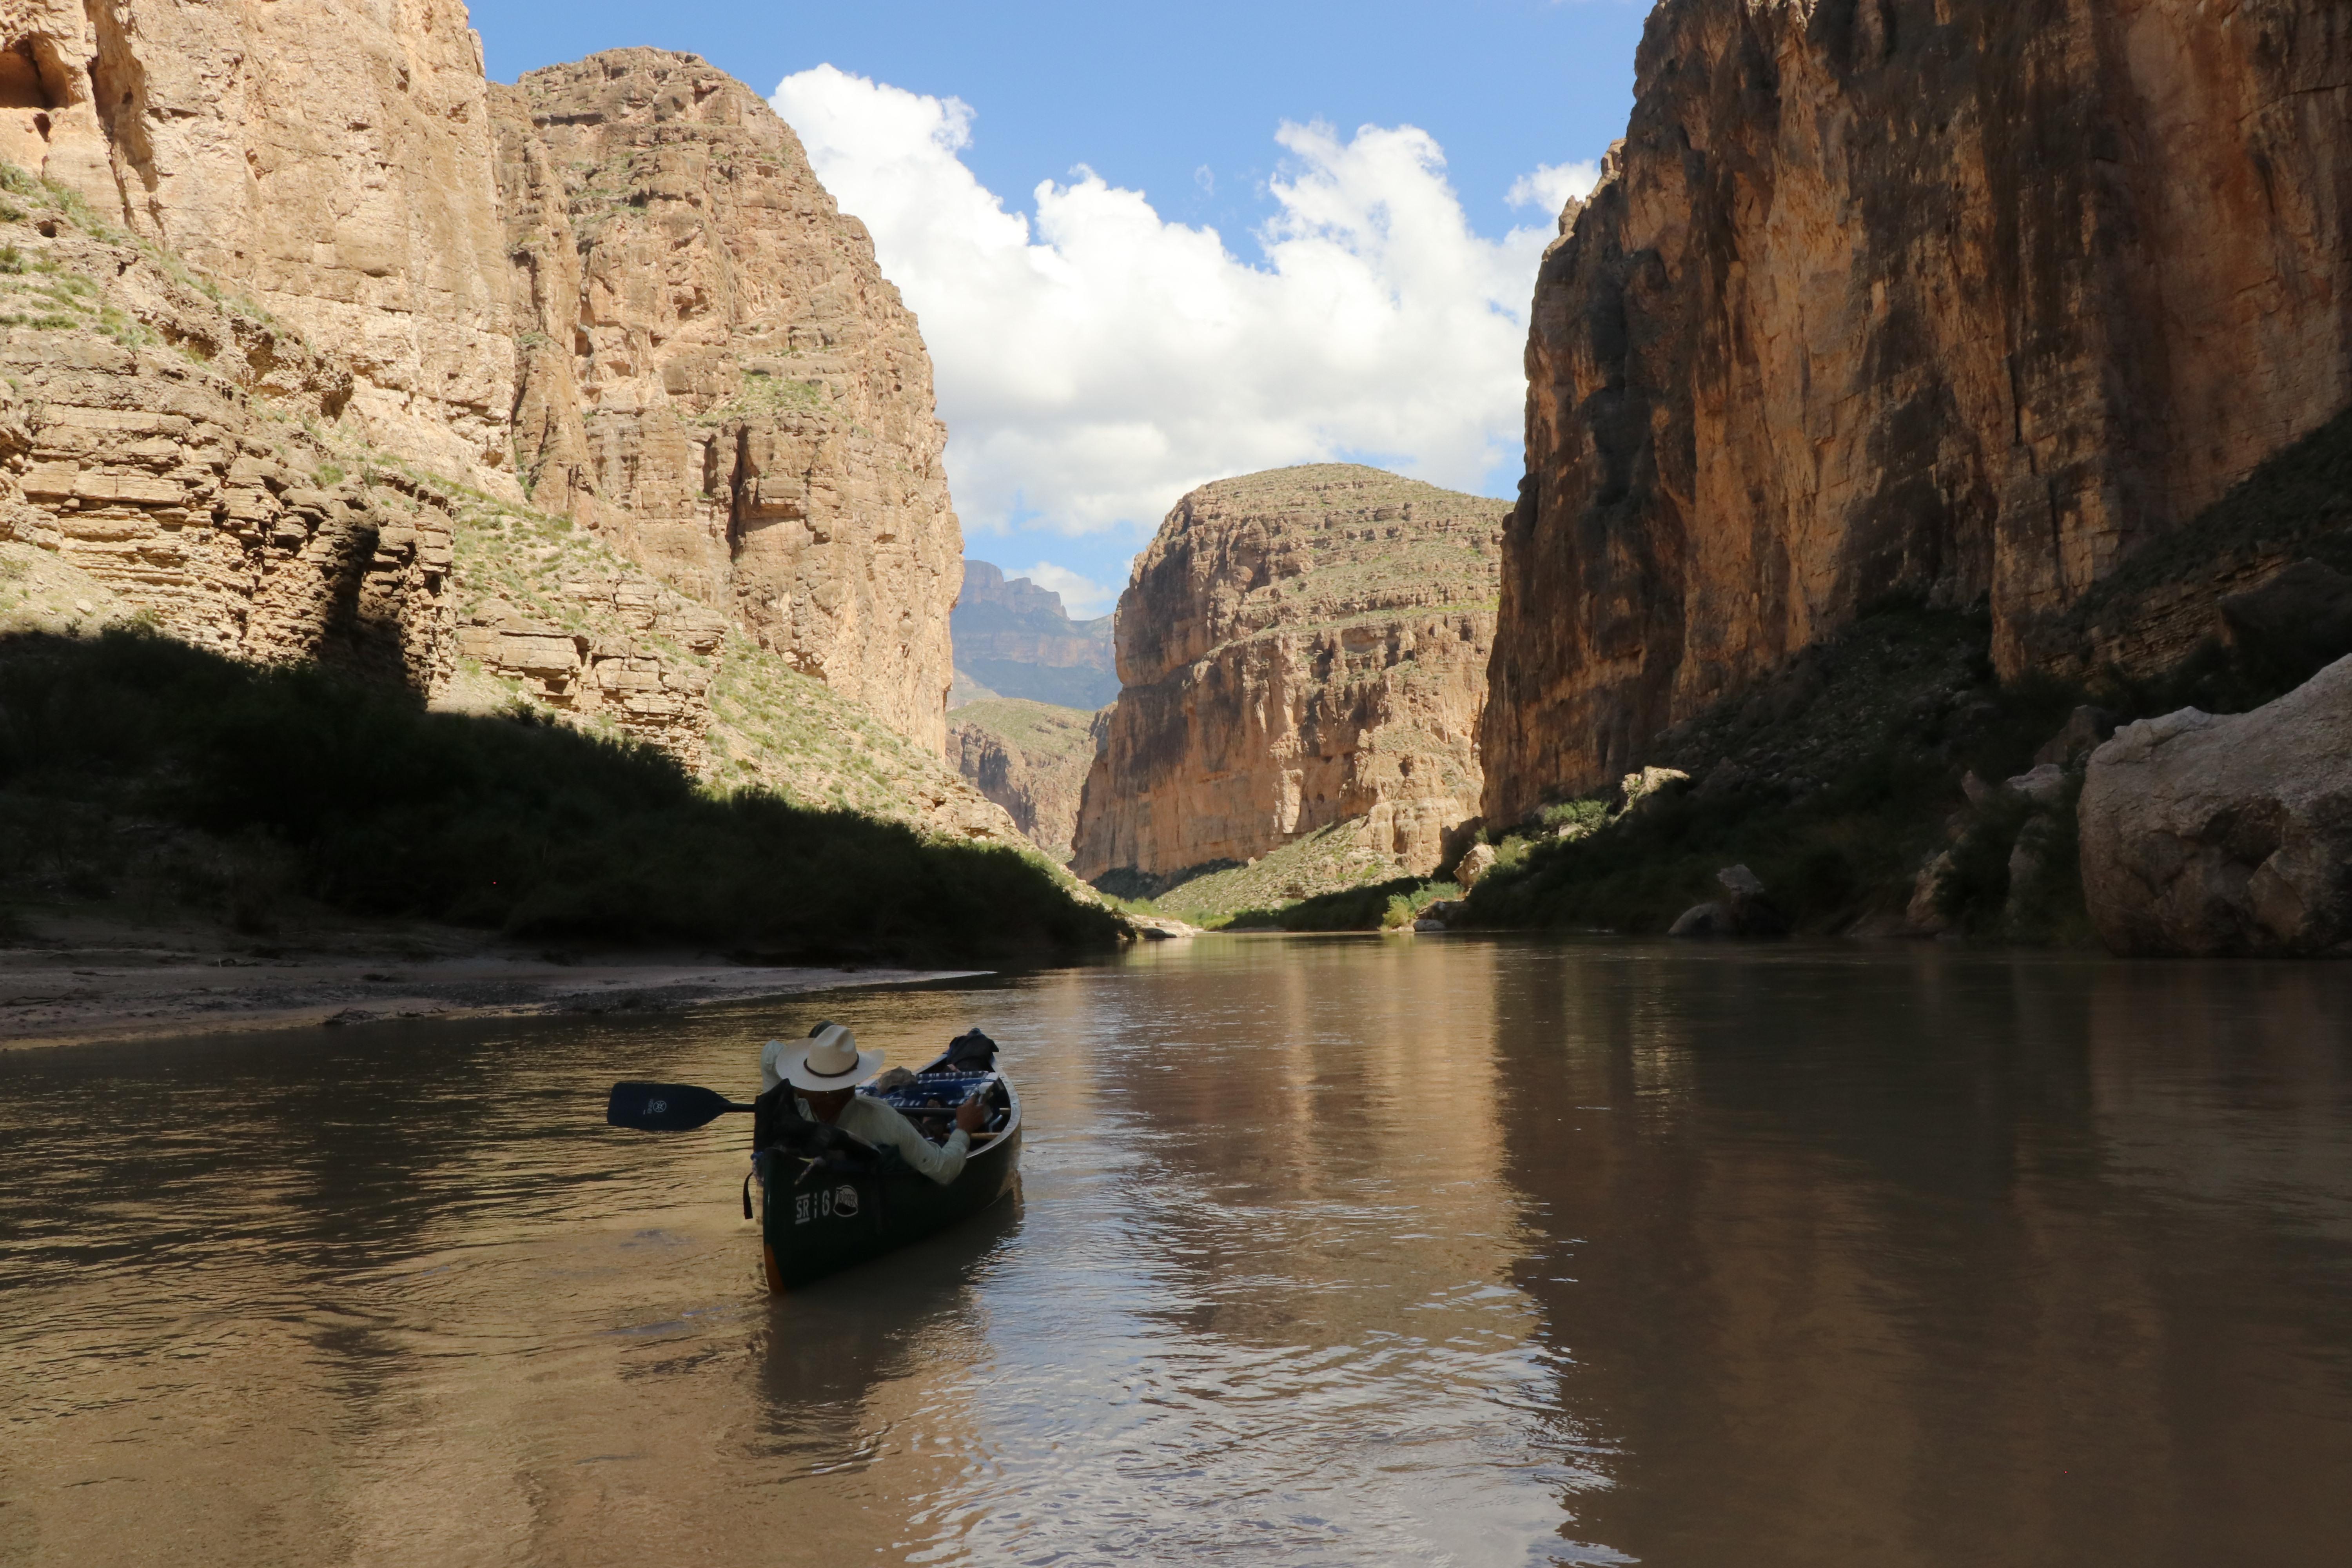 Canoeing Boquillas Canyon